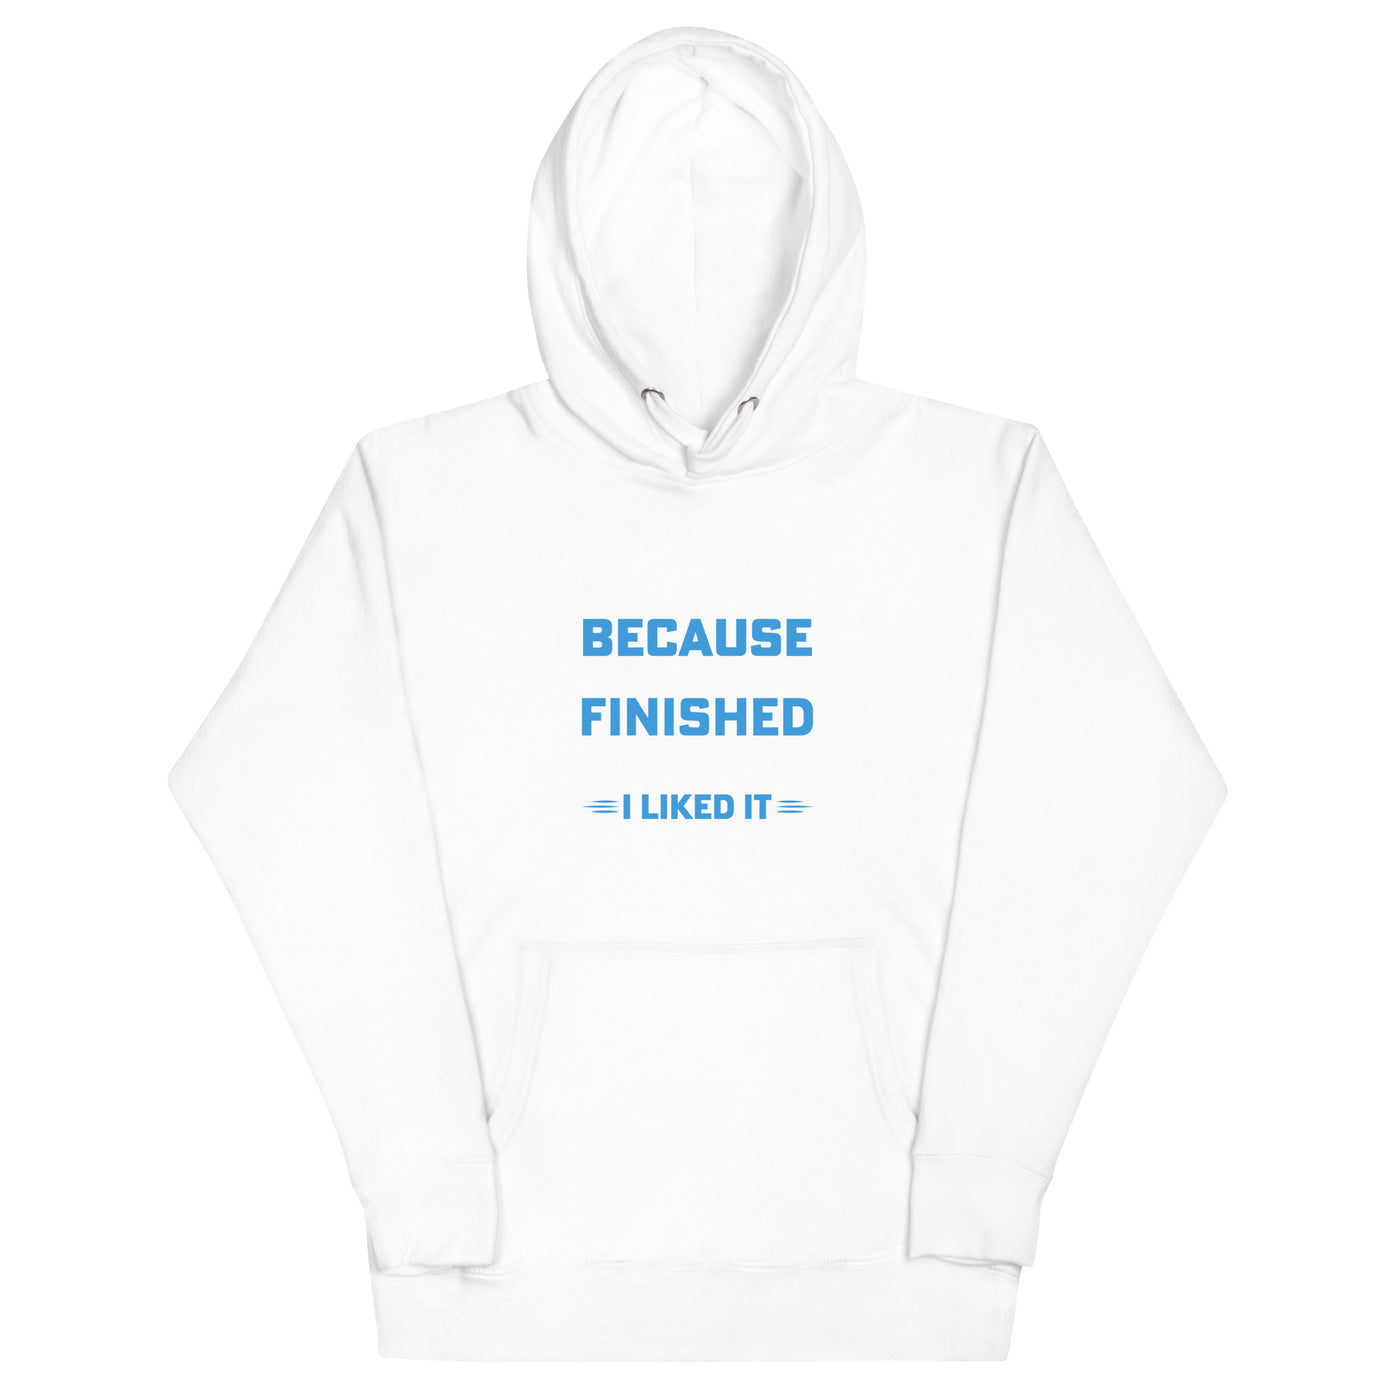 I clapped because - Unisex Hoodie